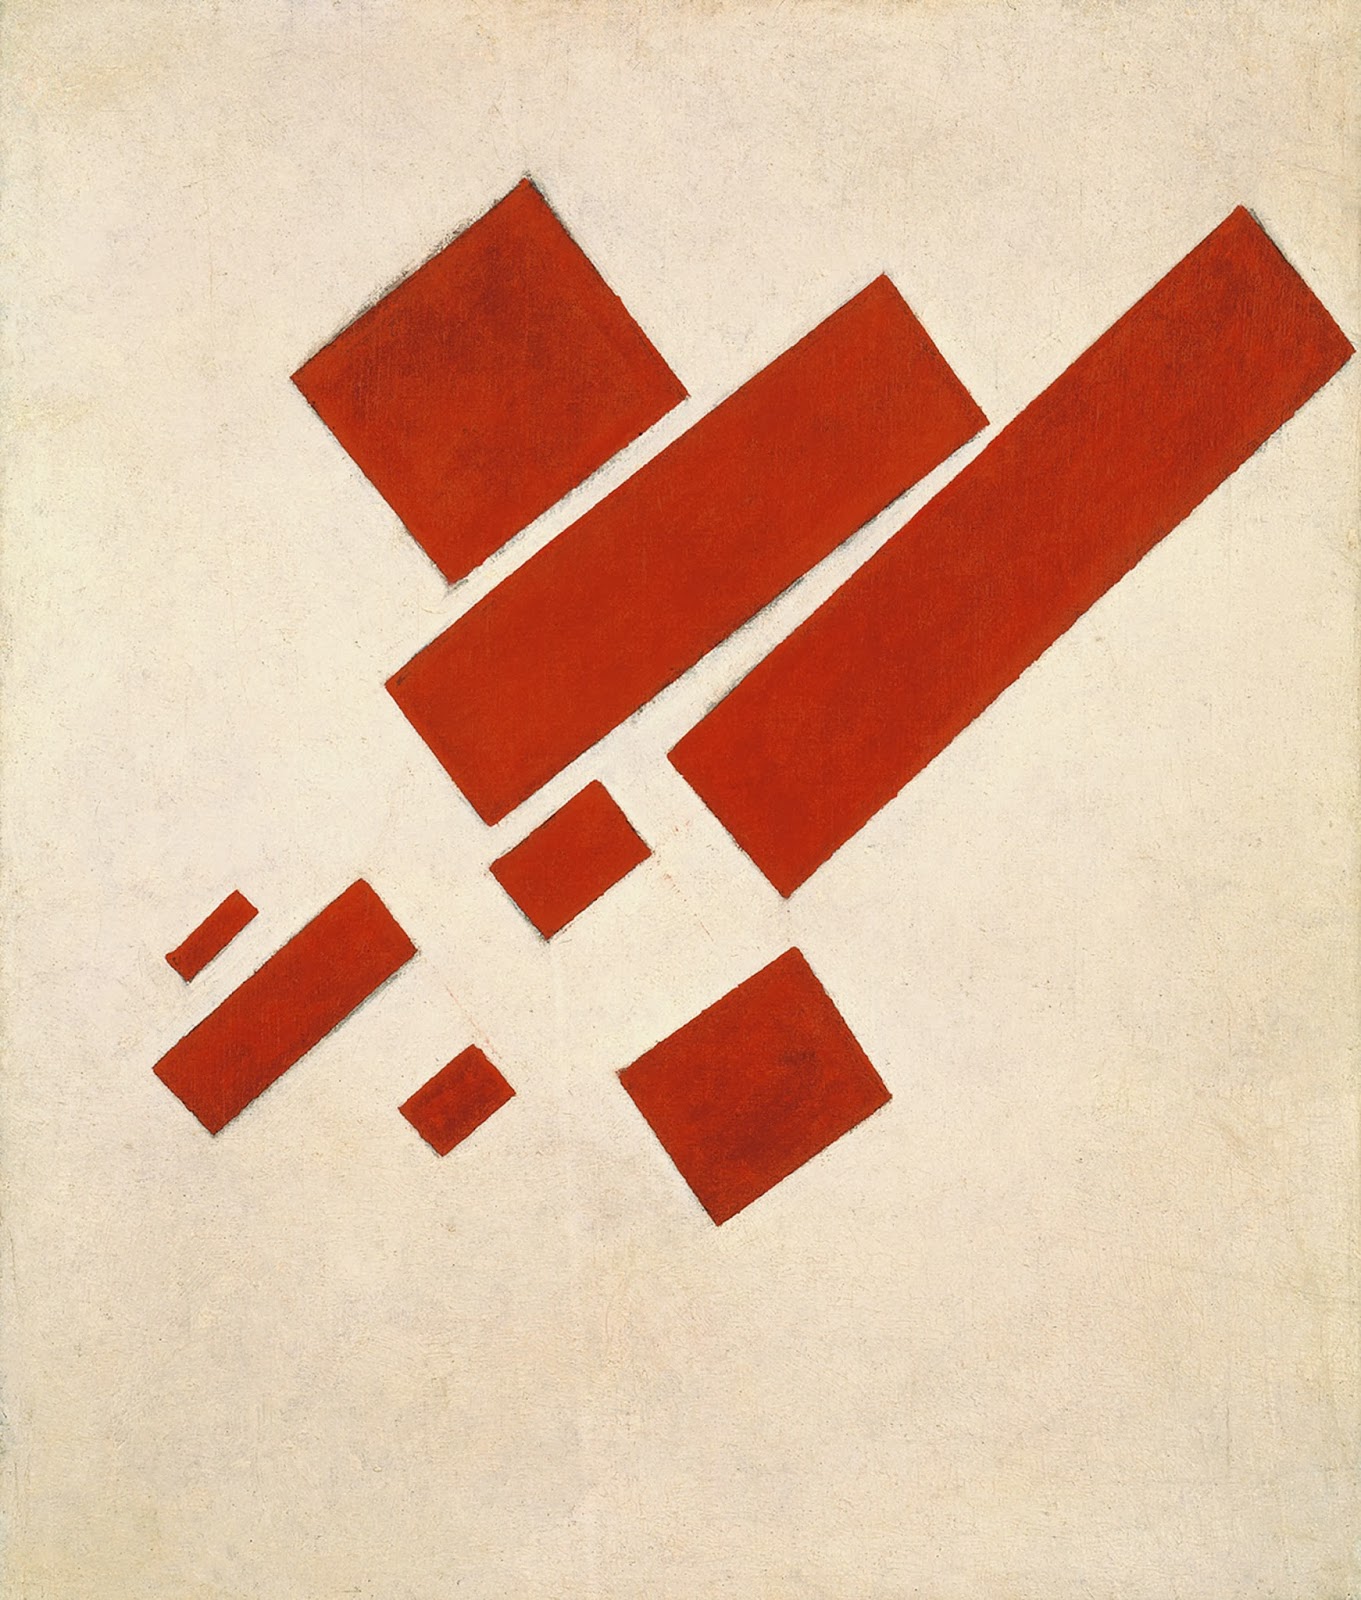 Suprematist Painting Eight Red Rectangles by Kazimir Malevich